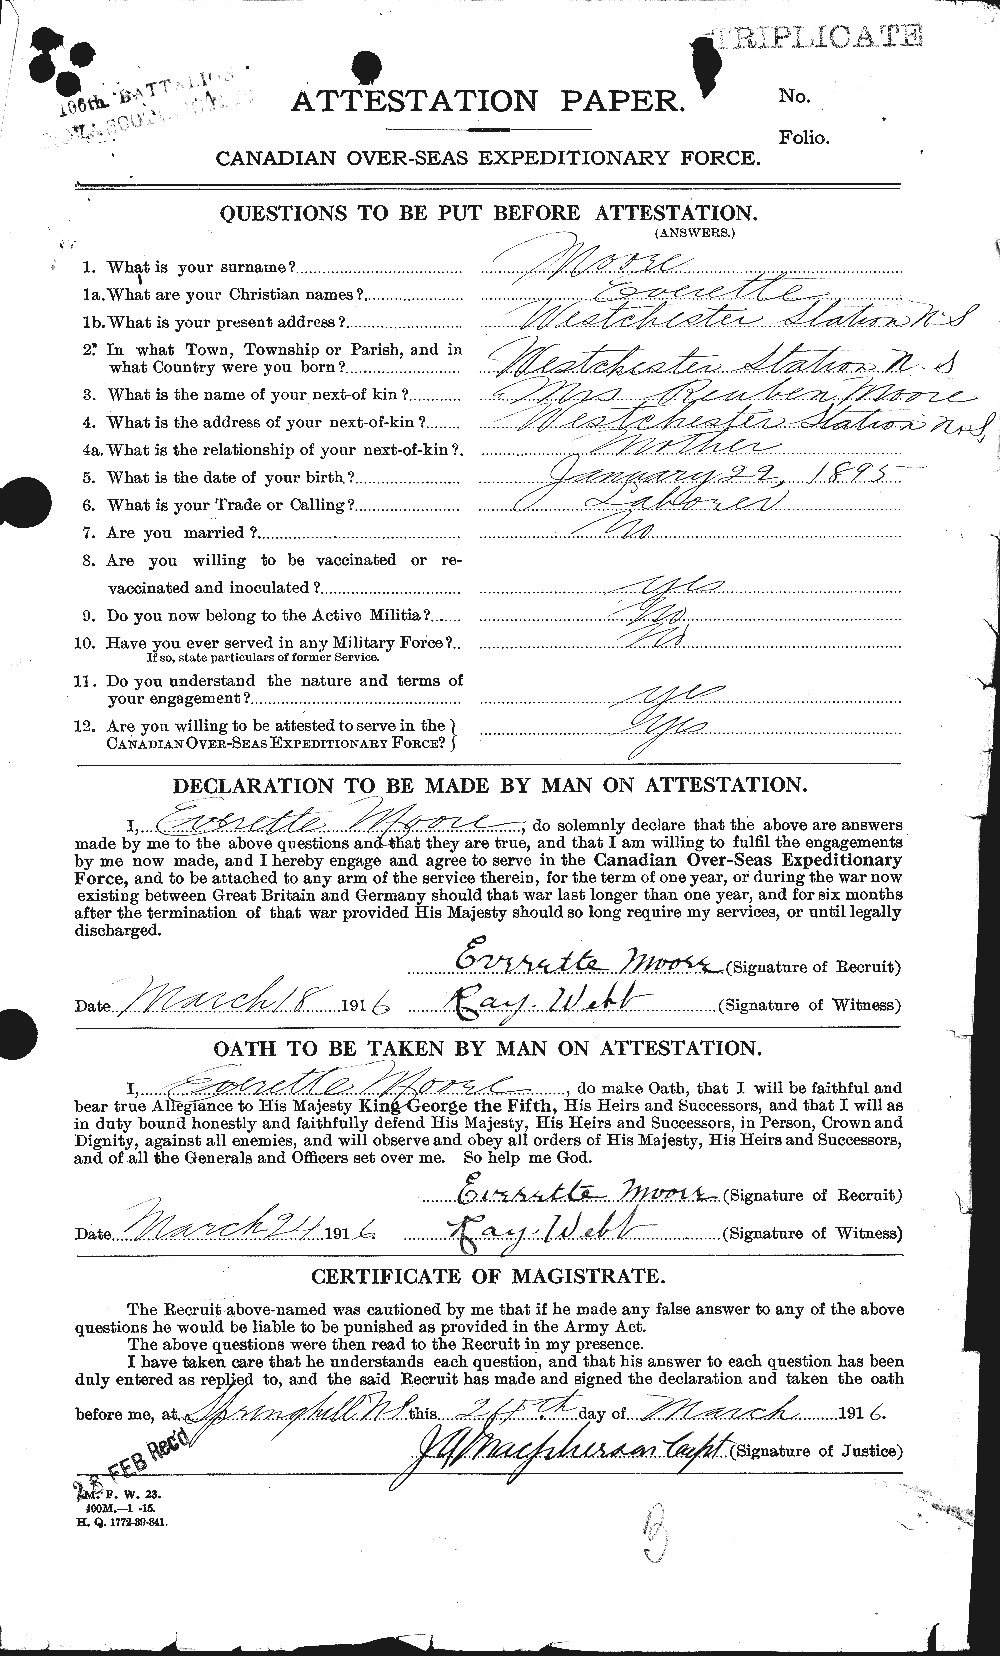 Personnel Records of the First World War - CEF 506681a